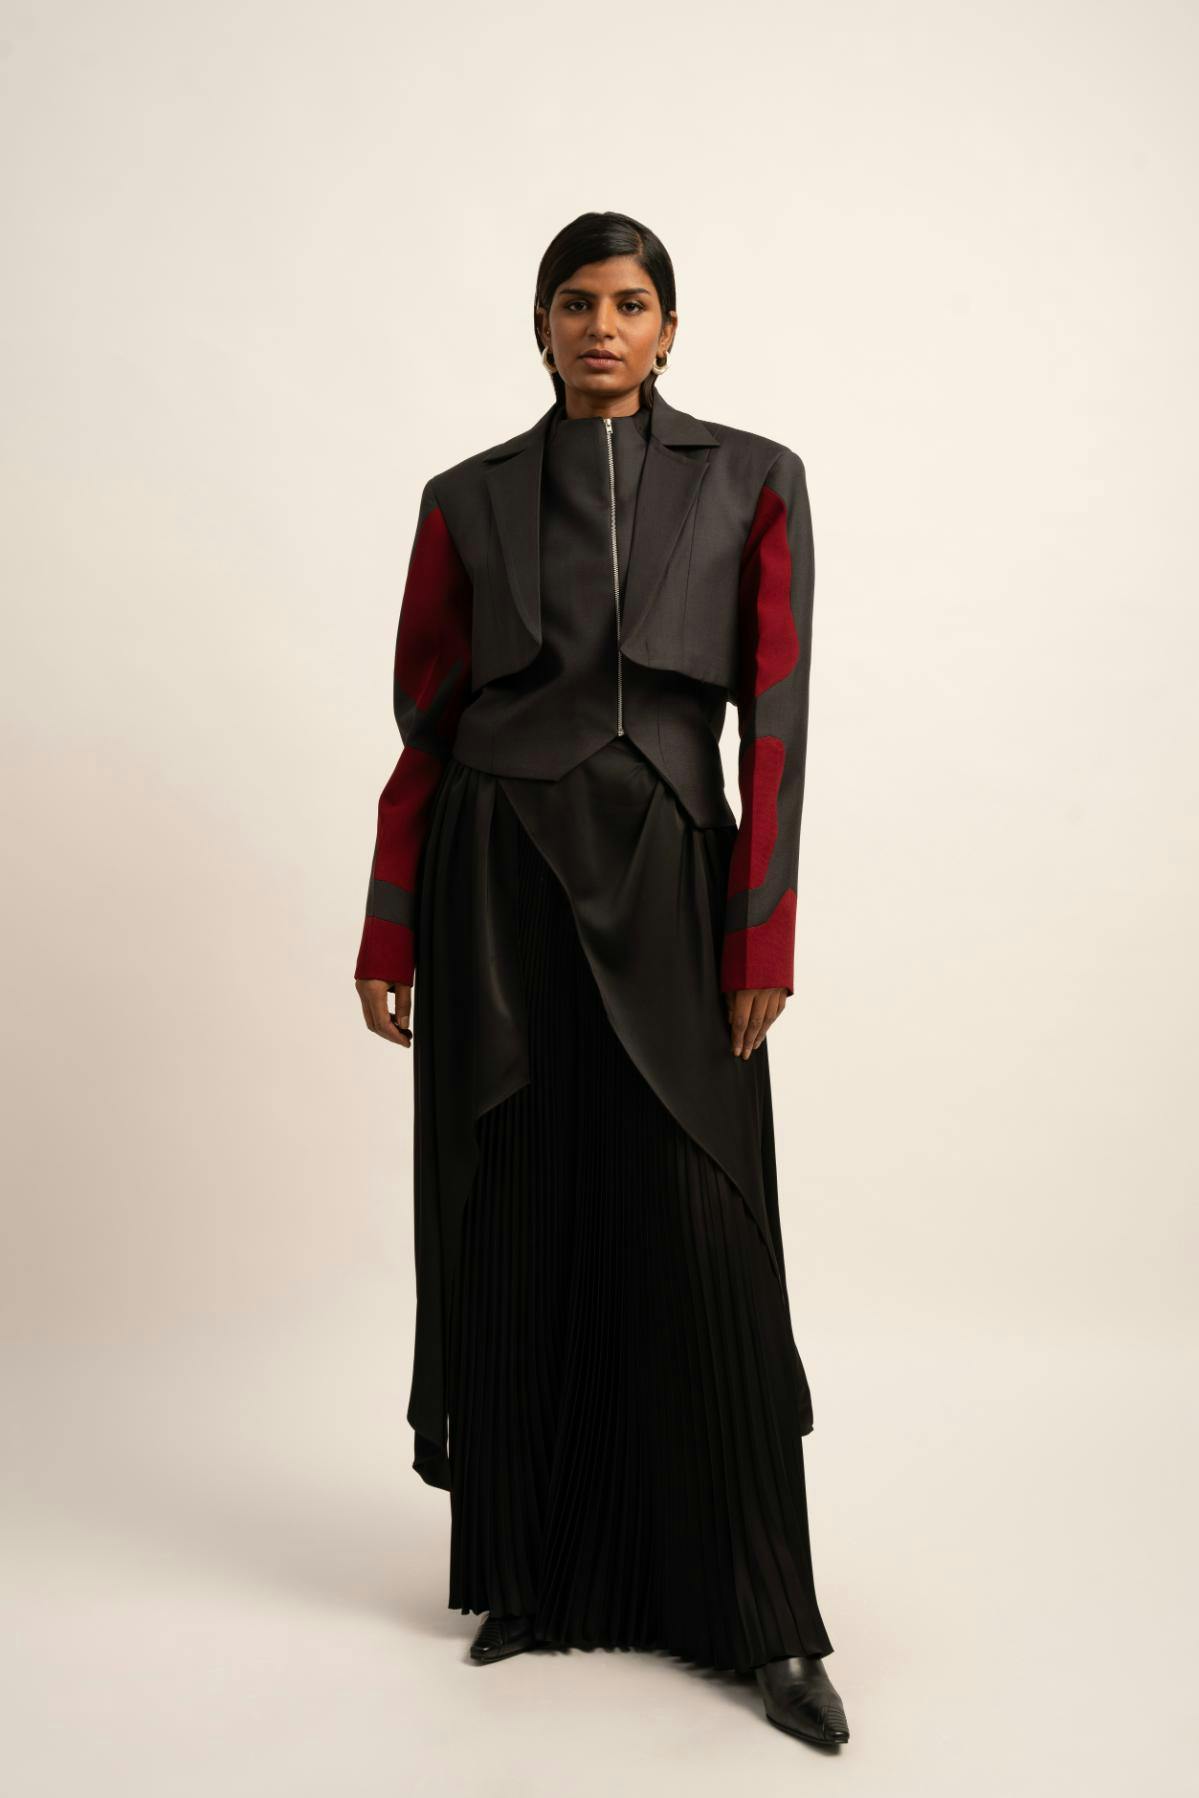 The Seraphic Symphony Cropped Blazer, a product by Siddhant Agrawal Label